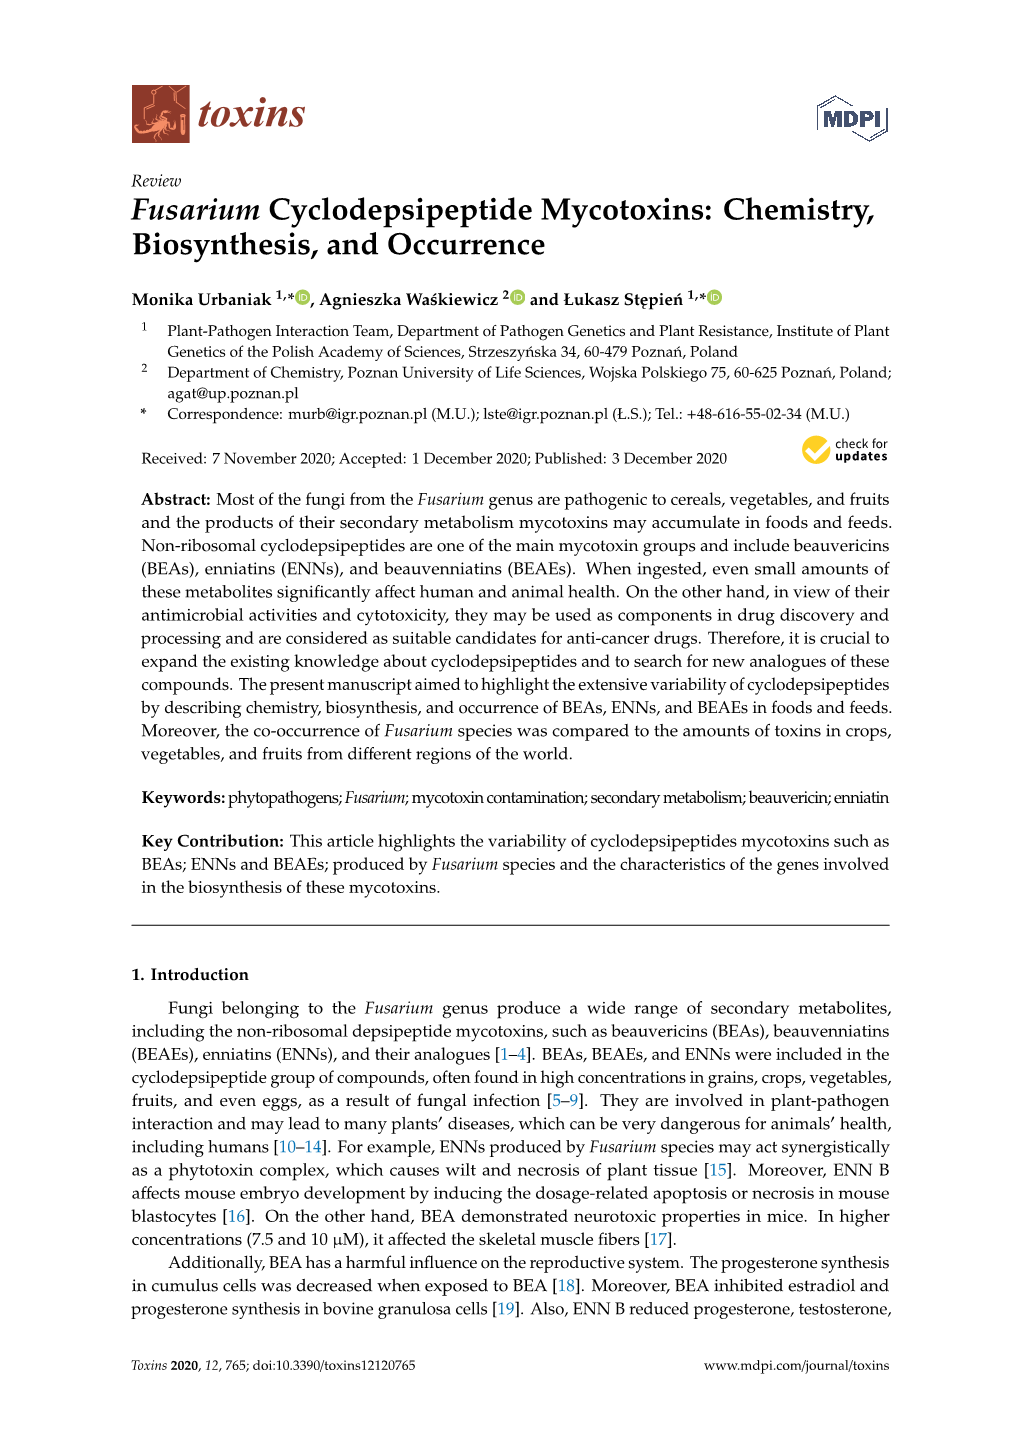 Fusarium Cyclodepsipeptide Mycotoxins: Chemistry, Biosynthesis, and Occurrence